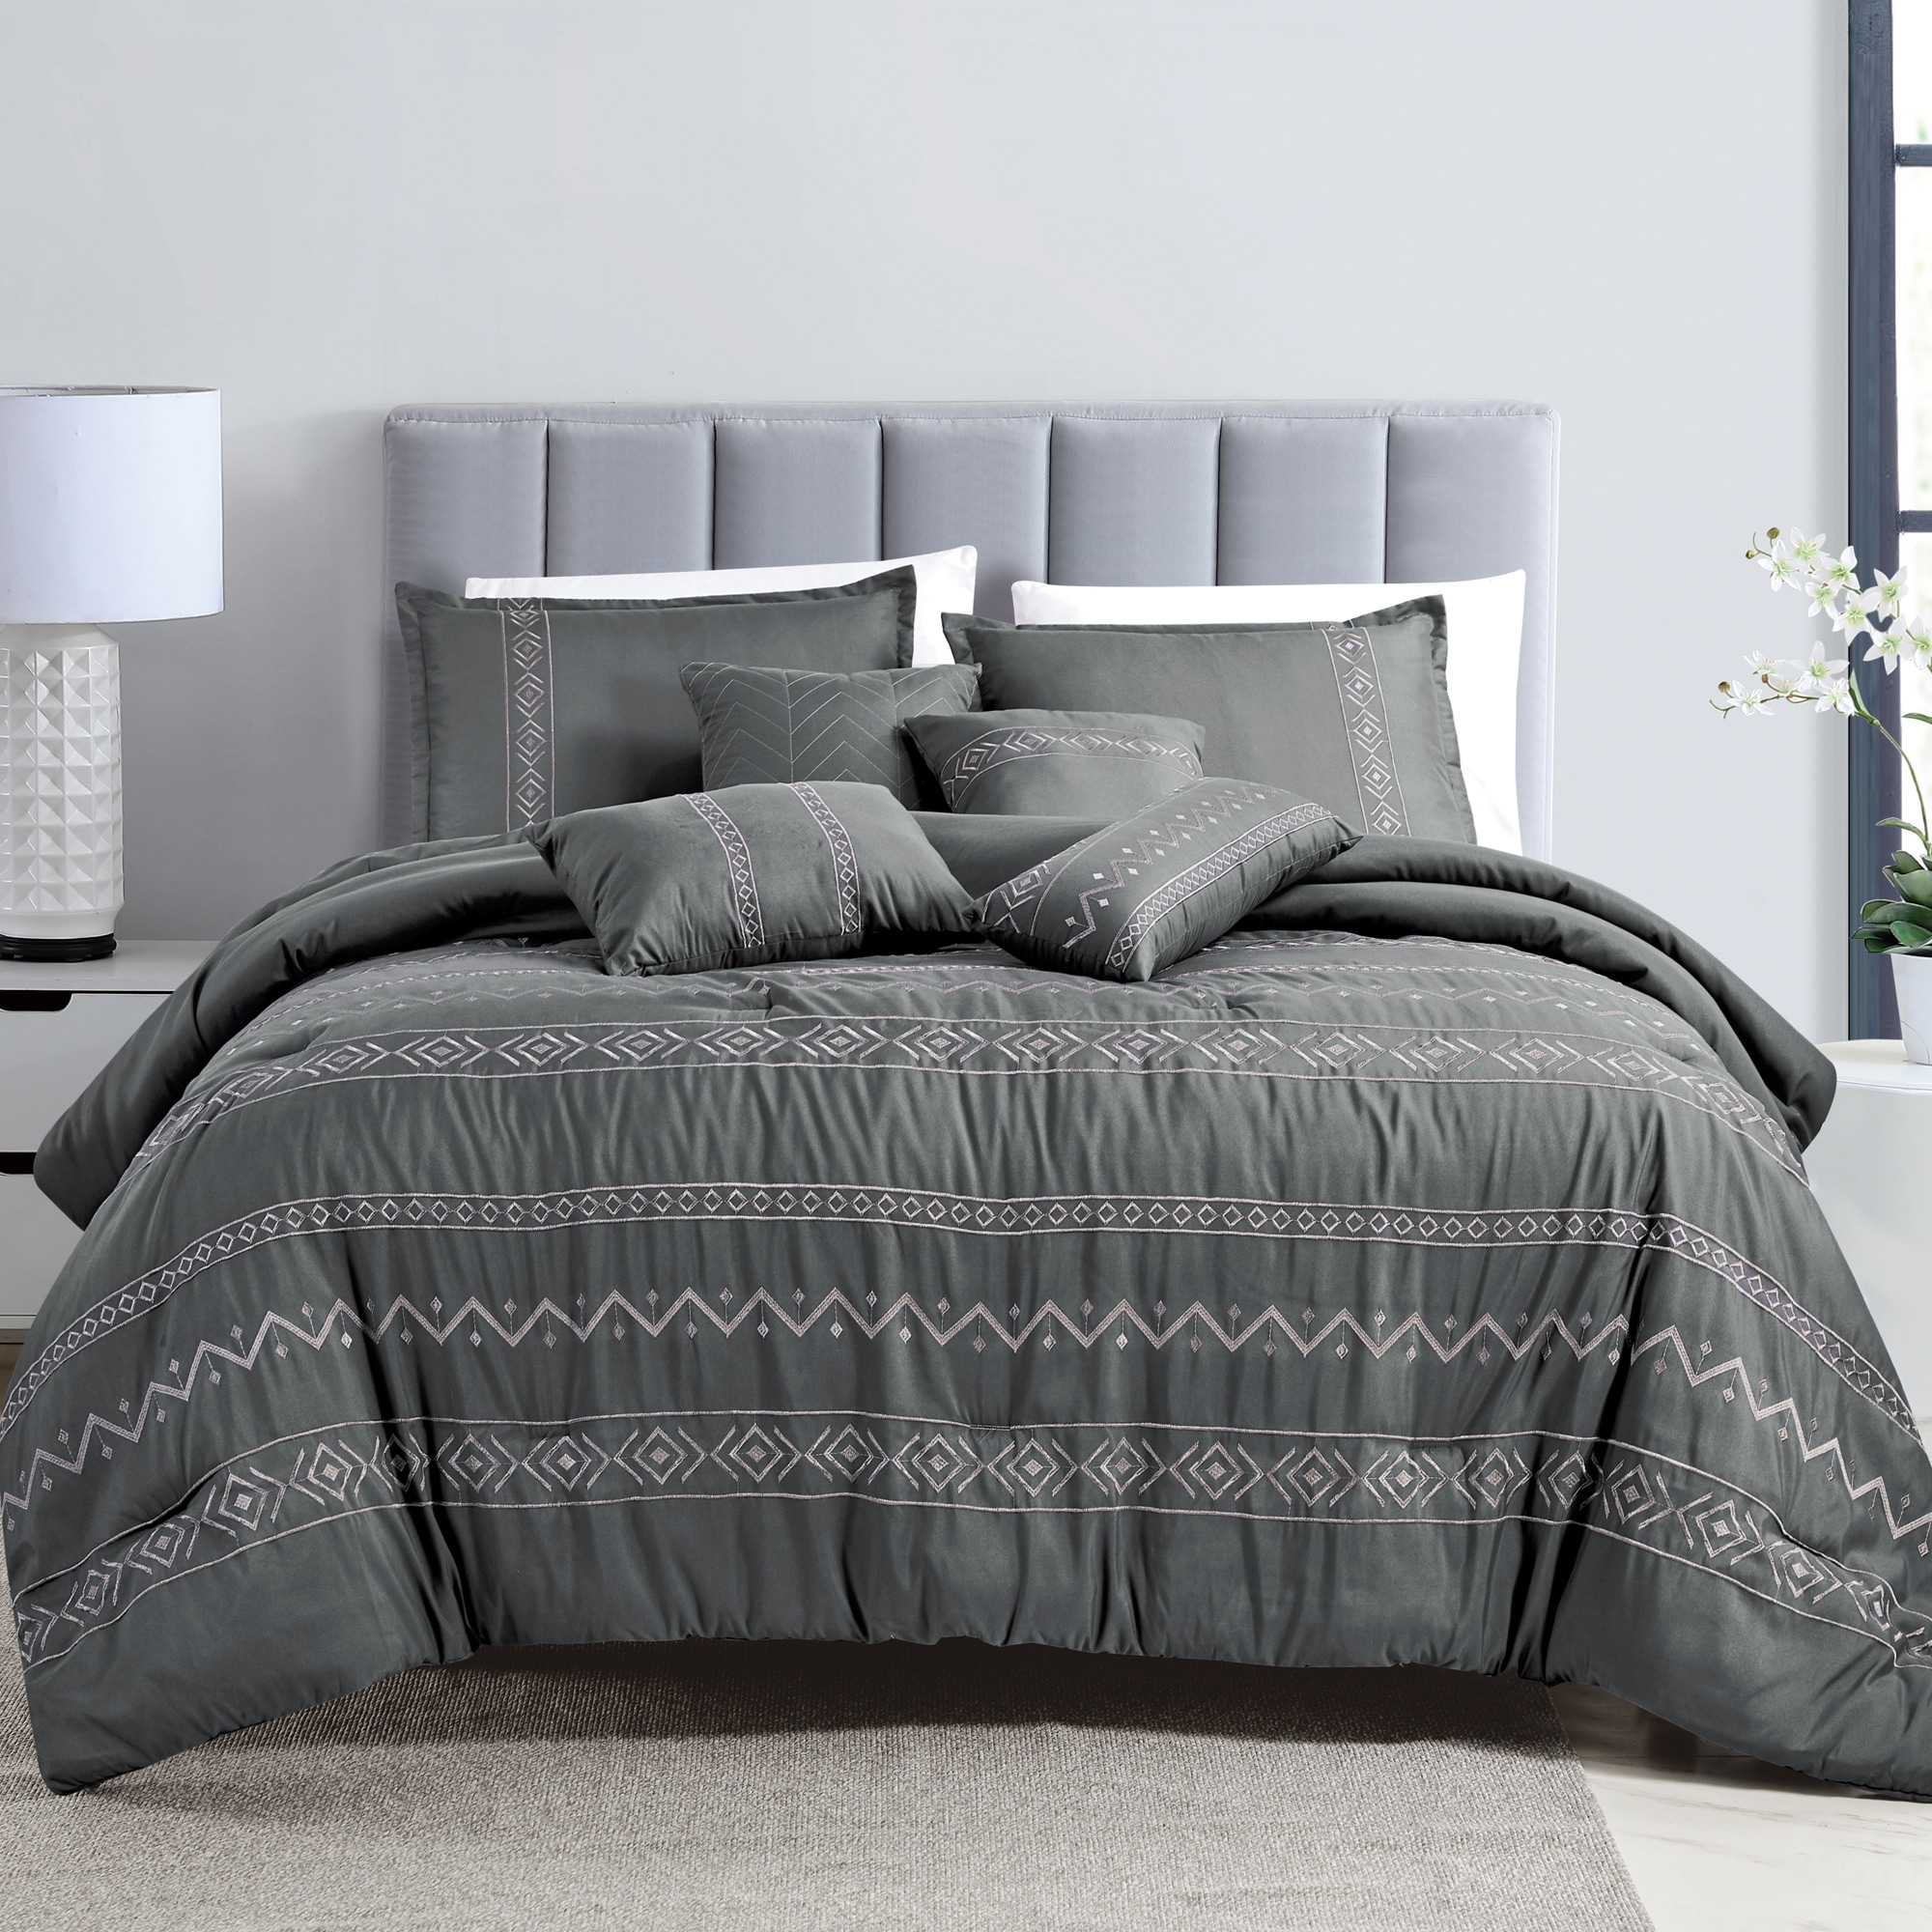 https://ak1.ostkcdn.com/images/products/is/images/direct/f4d3f23438c2a2ebd7261b4ea864520d4eaa9bec/Buffy-Luxury-7-Piece-Comforter-Set.jpg